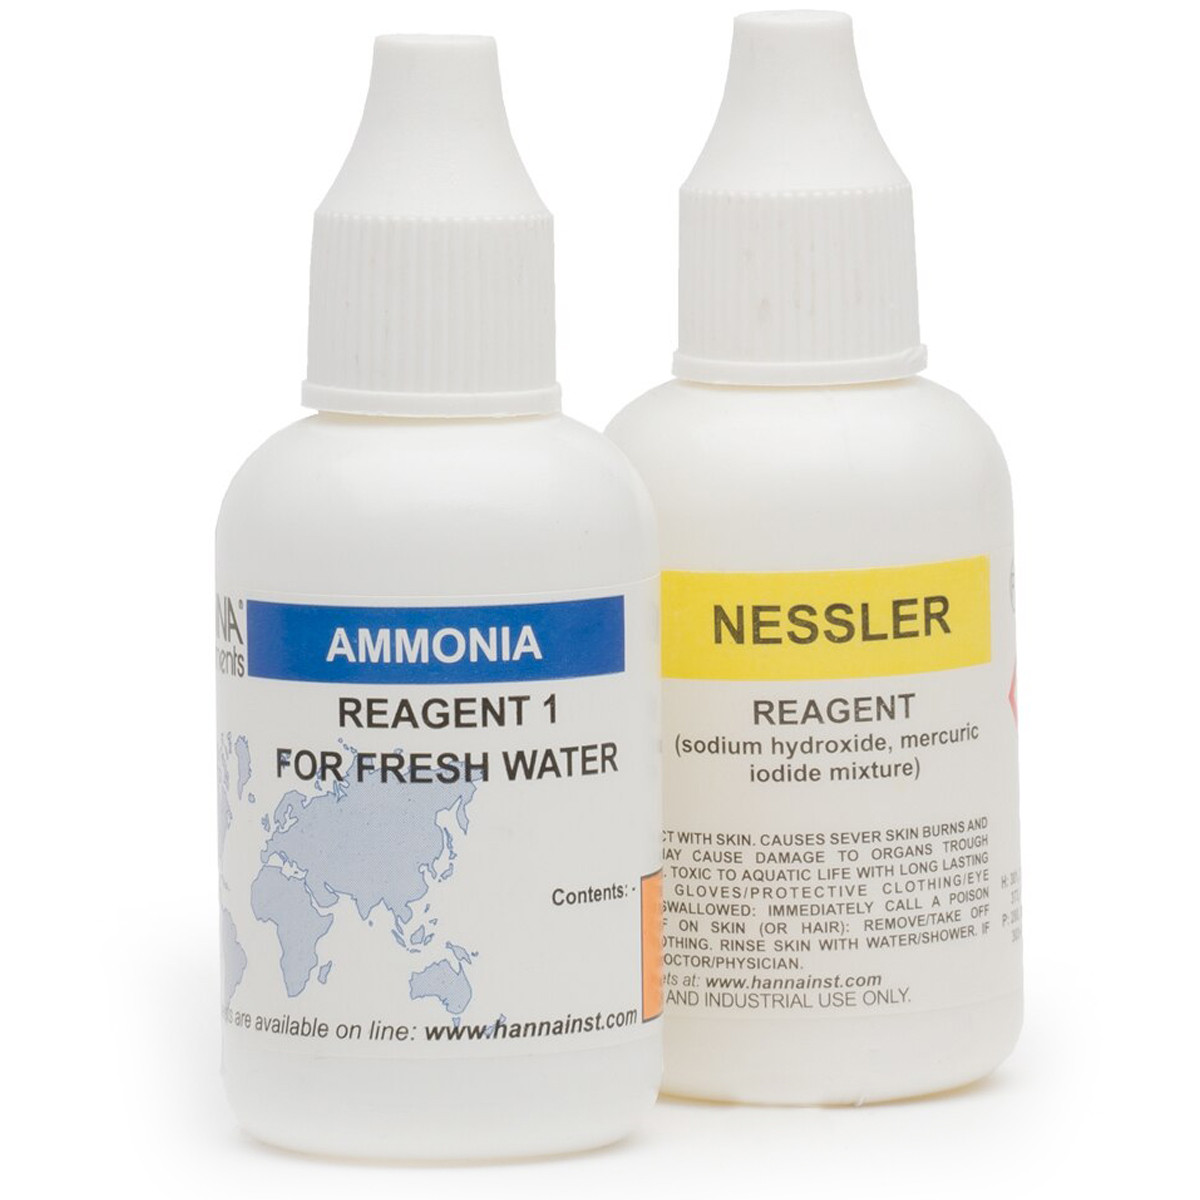 Ammonia Test Kit for Fresh Water Replacement Reagents (100 tests)